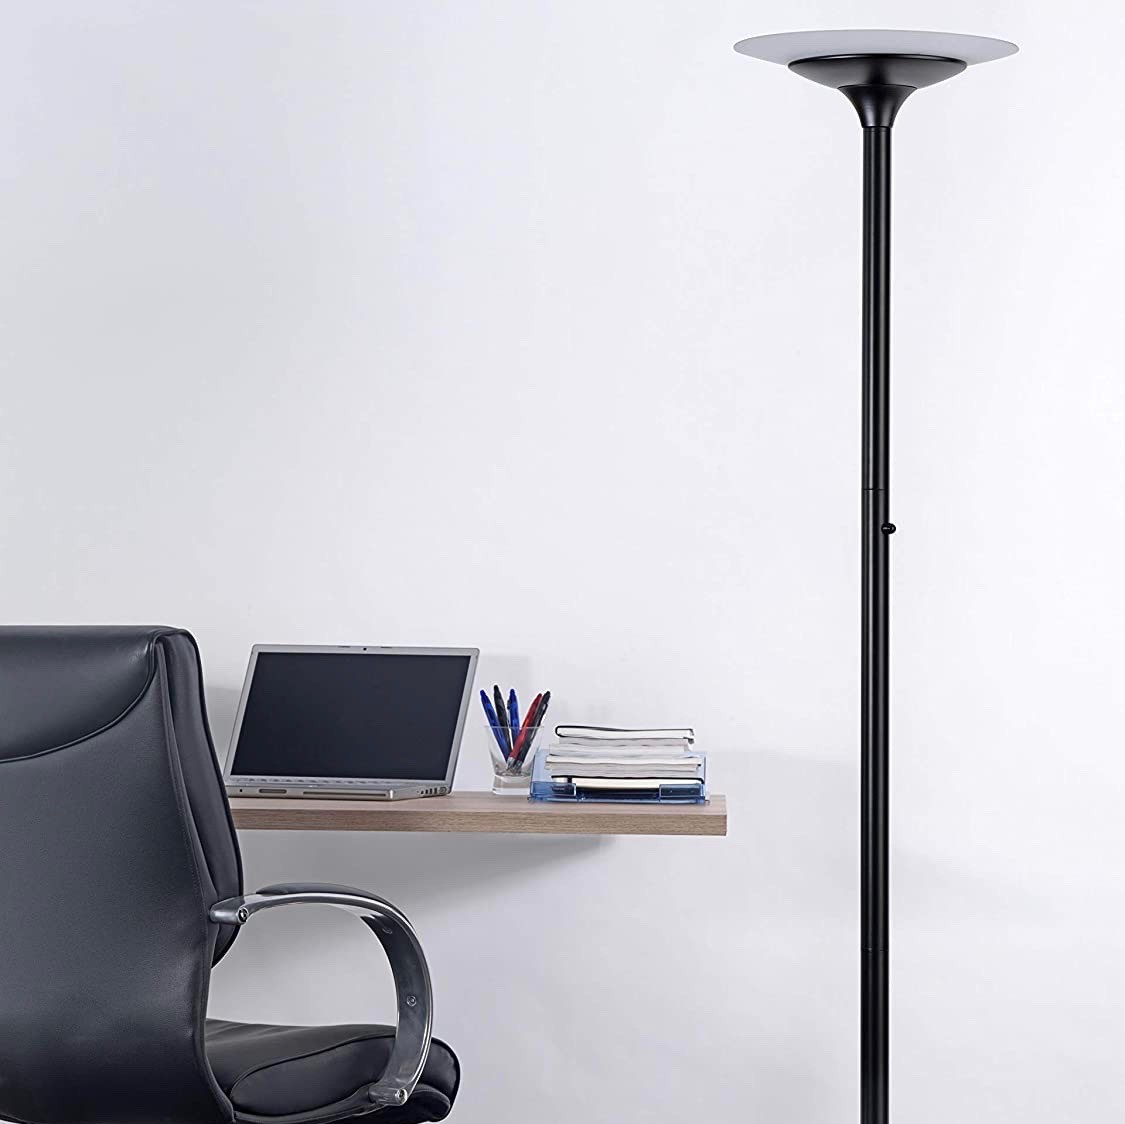 224,95 € Free Shipping | Floor lamp 22W Crystal. White Color